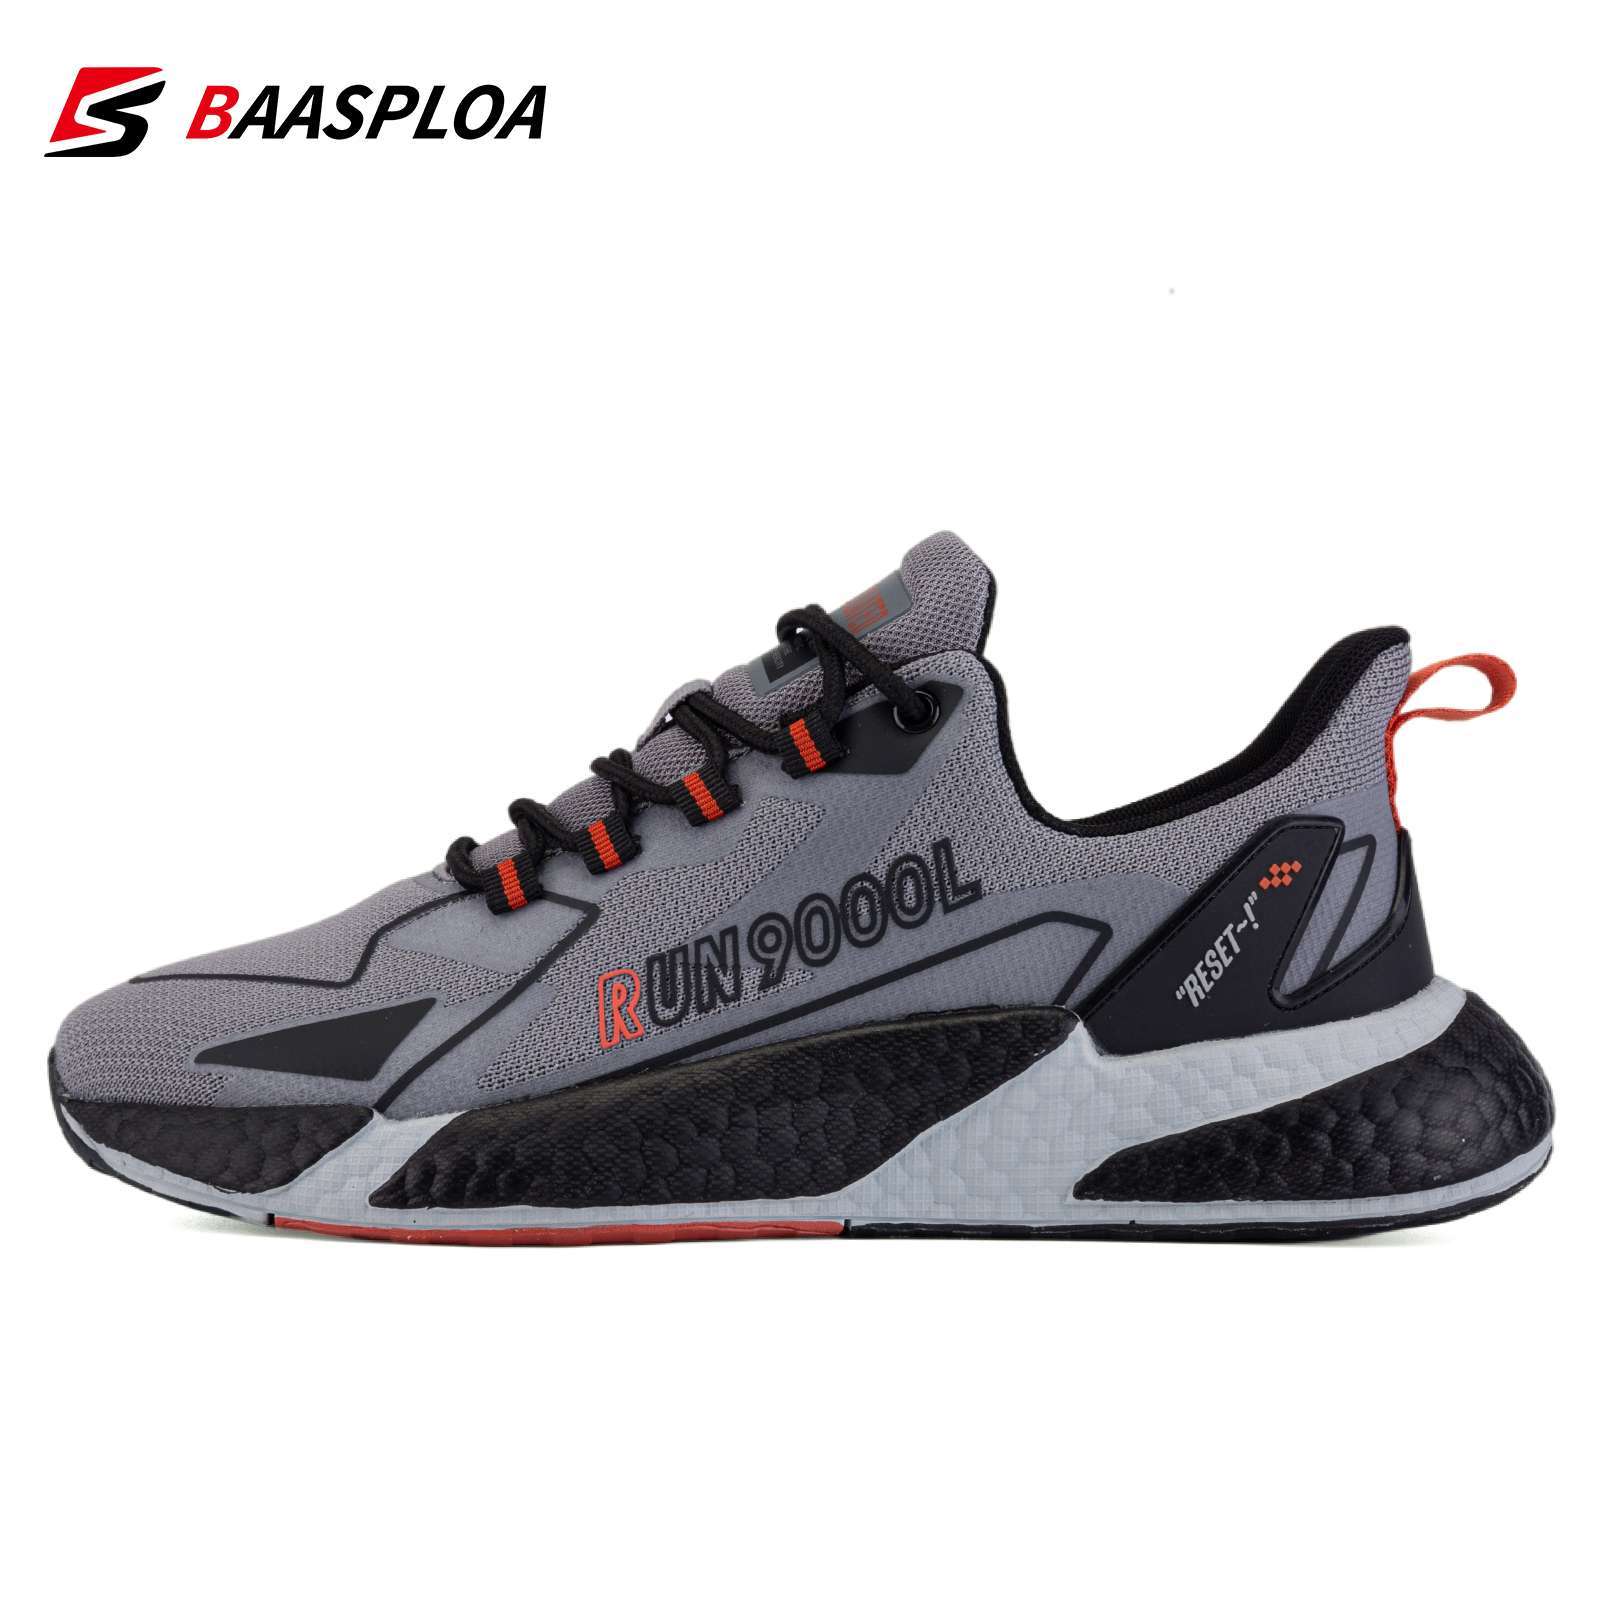 Baasploa Spring Men Sneaker Shoe Fashion Casual Shoes Mesh Sneakers Breathable Male Walking Shoes Lace Up